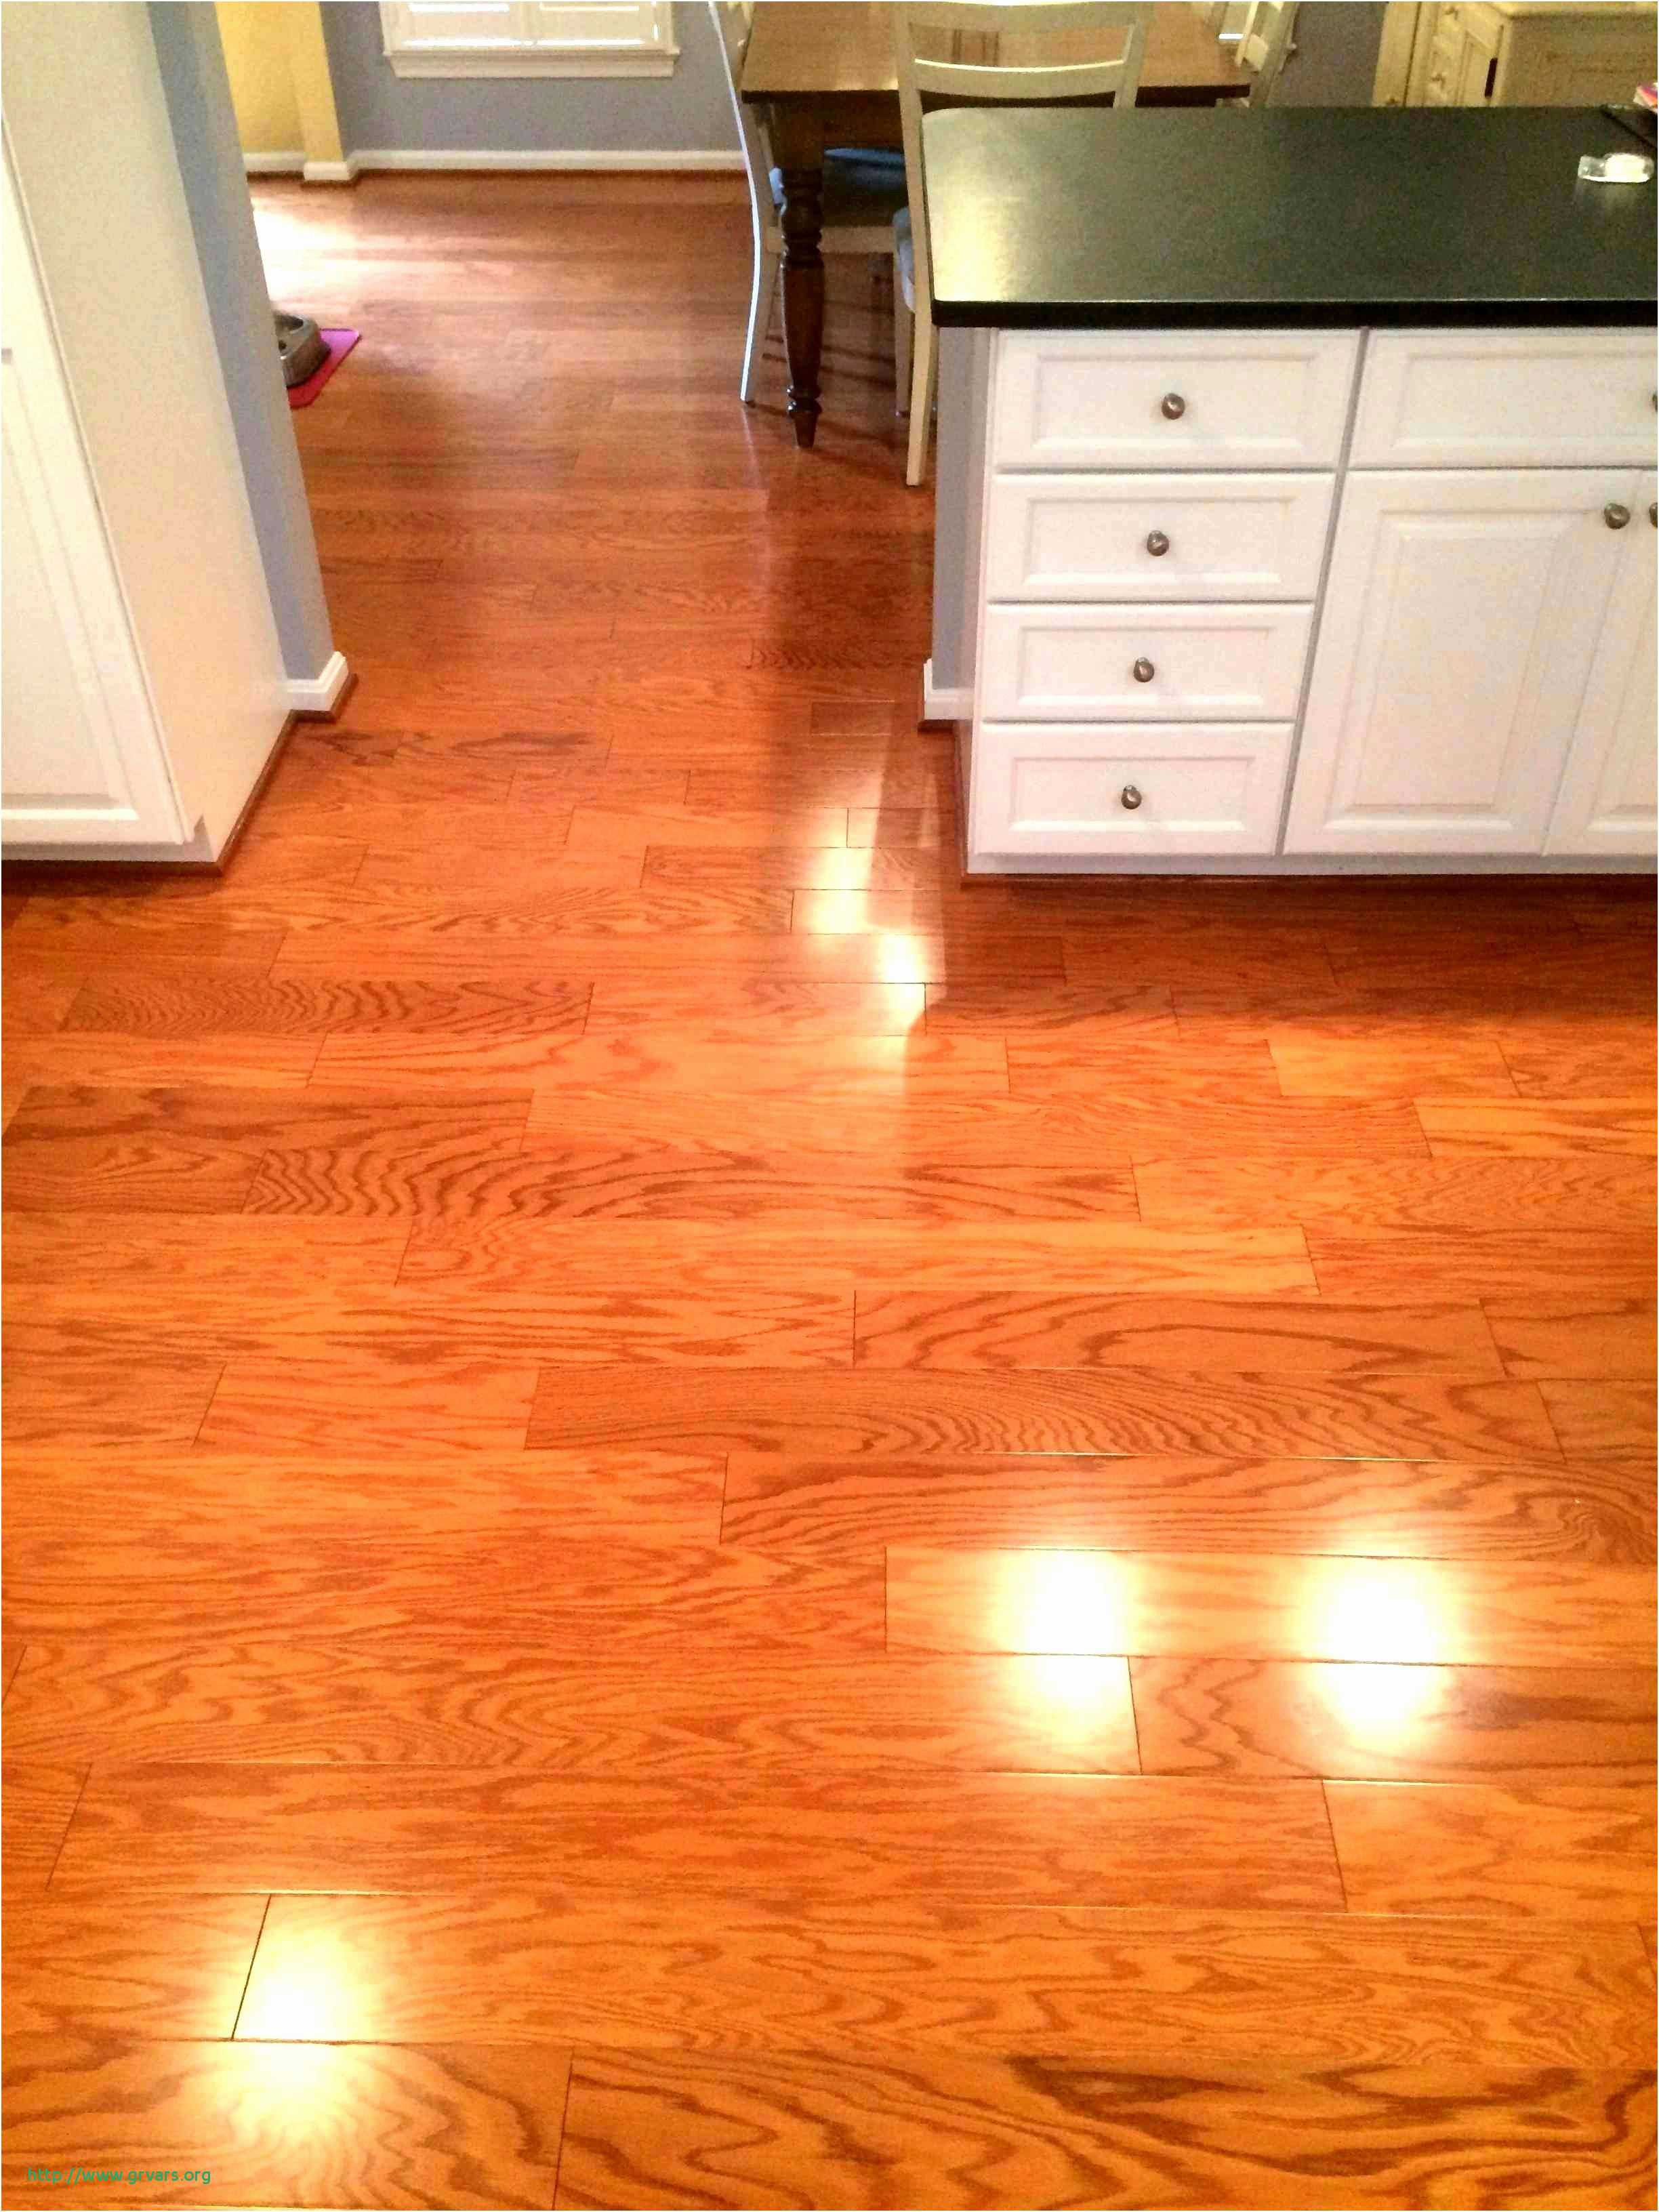 21 Elegant Can You Lay Hardwood Floors Over Tile 2024 free download can you lay hardwood floors over tile of 16 charmant step by step hardwood floor installation ideas blog in 16 photos of the 16 charmant step by step hardwood floor installation